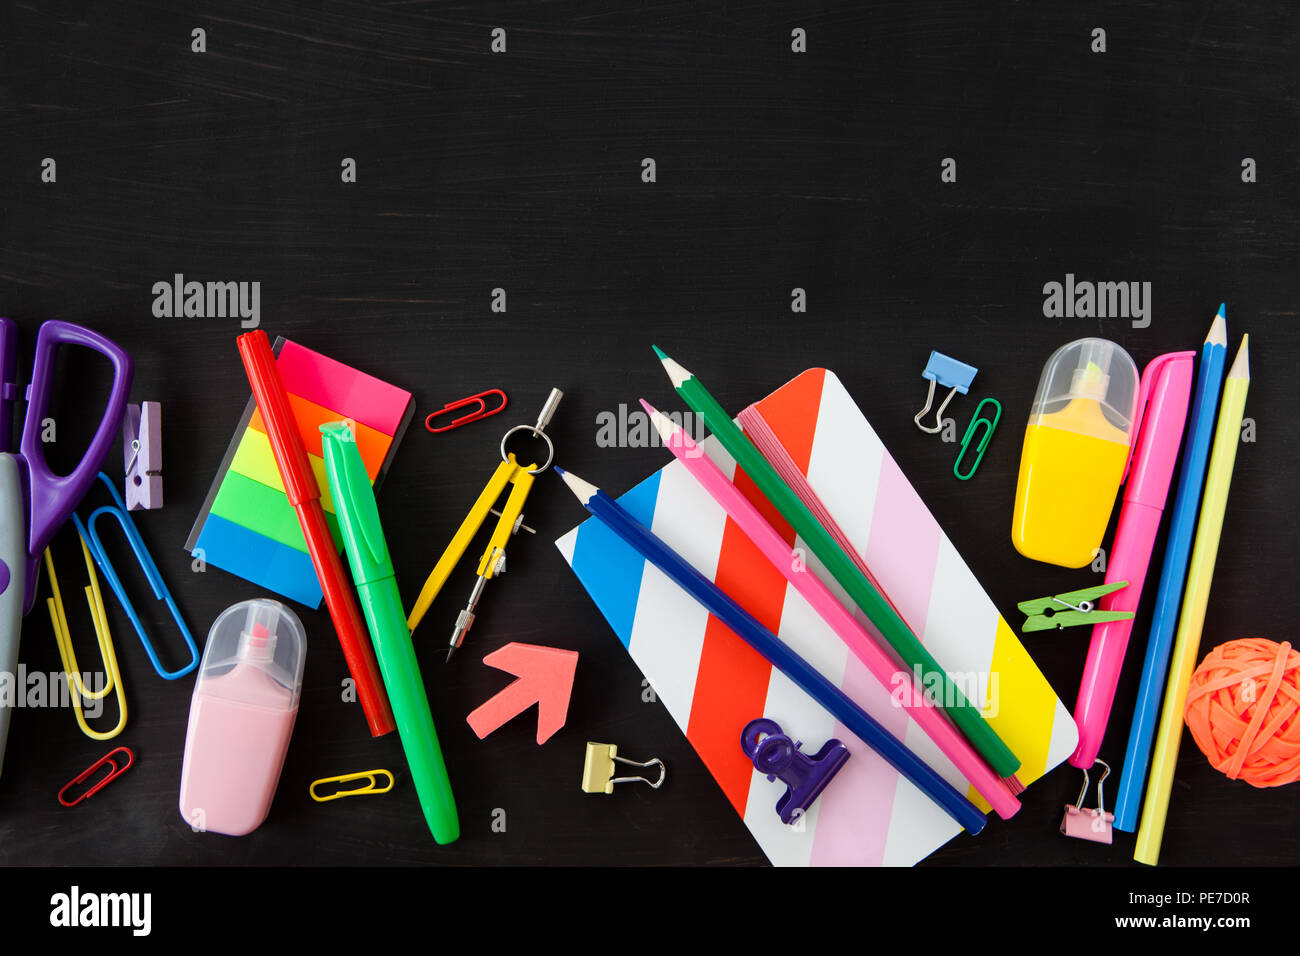 Colorful office / school supplies on a black background Stock Photo